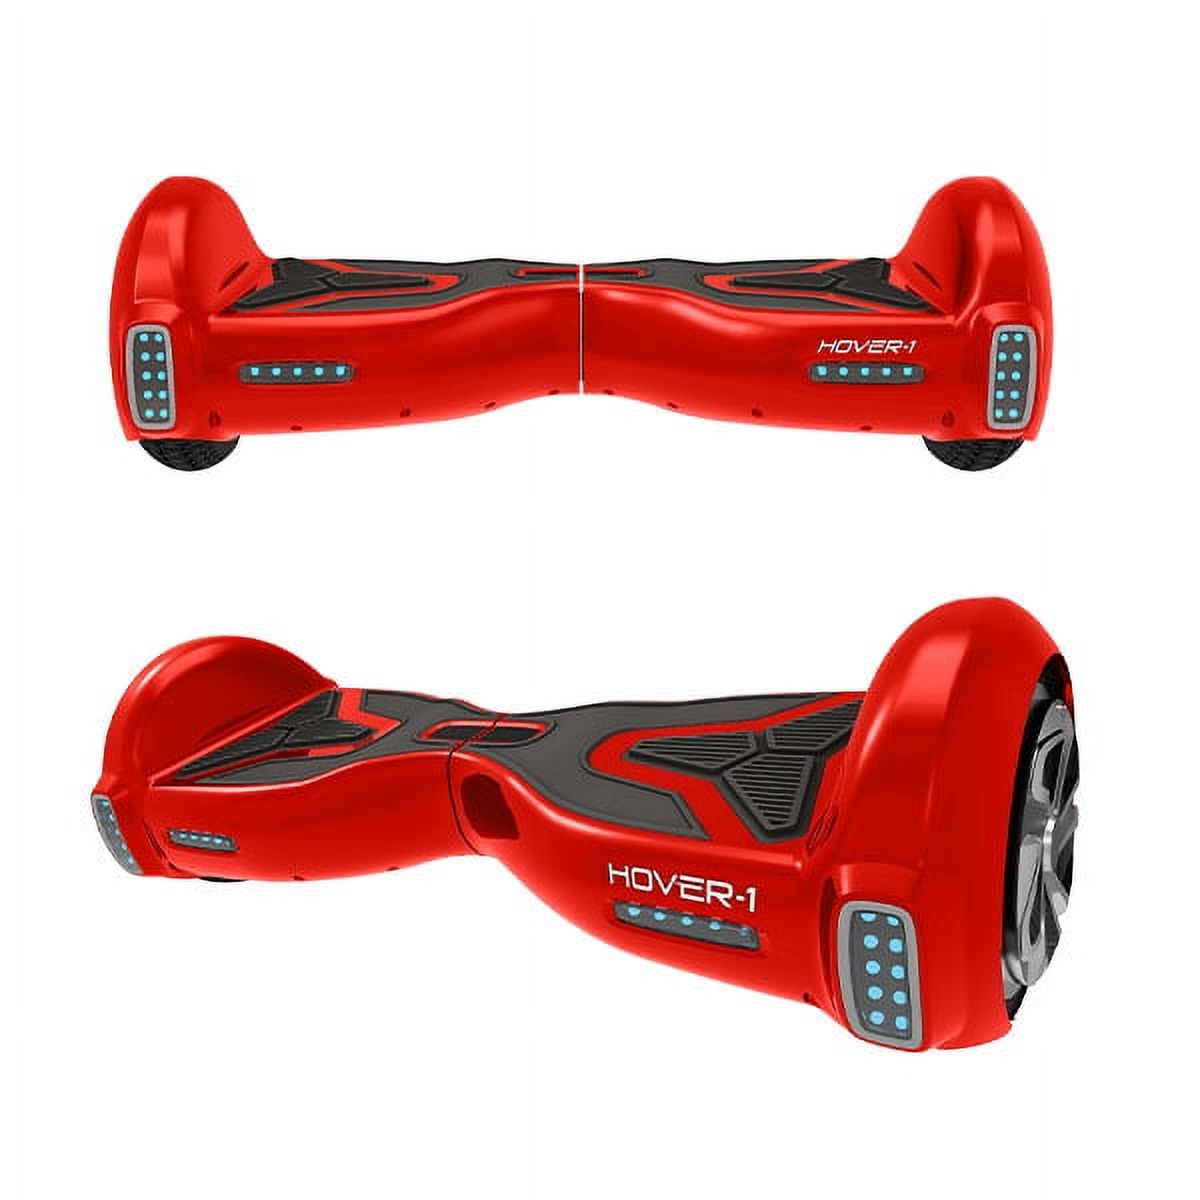 Hover-1 H1 Hoverboard, Red, 264 Lbs. Max Weight with LED Lights - image 2 of 8